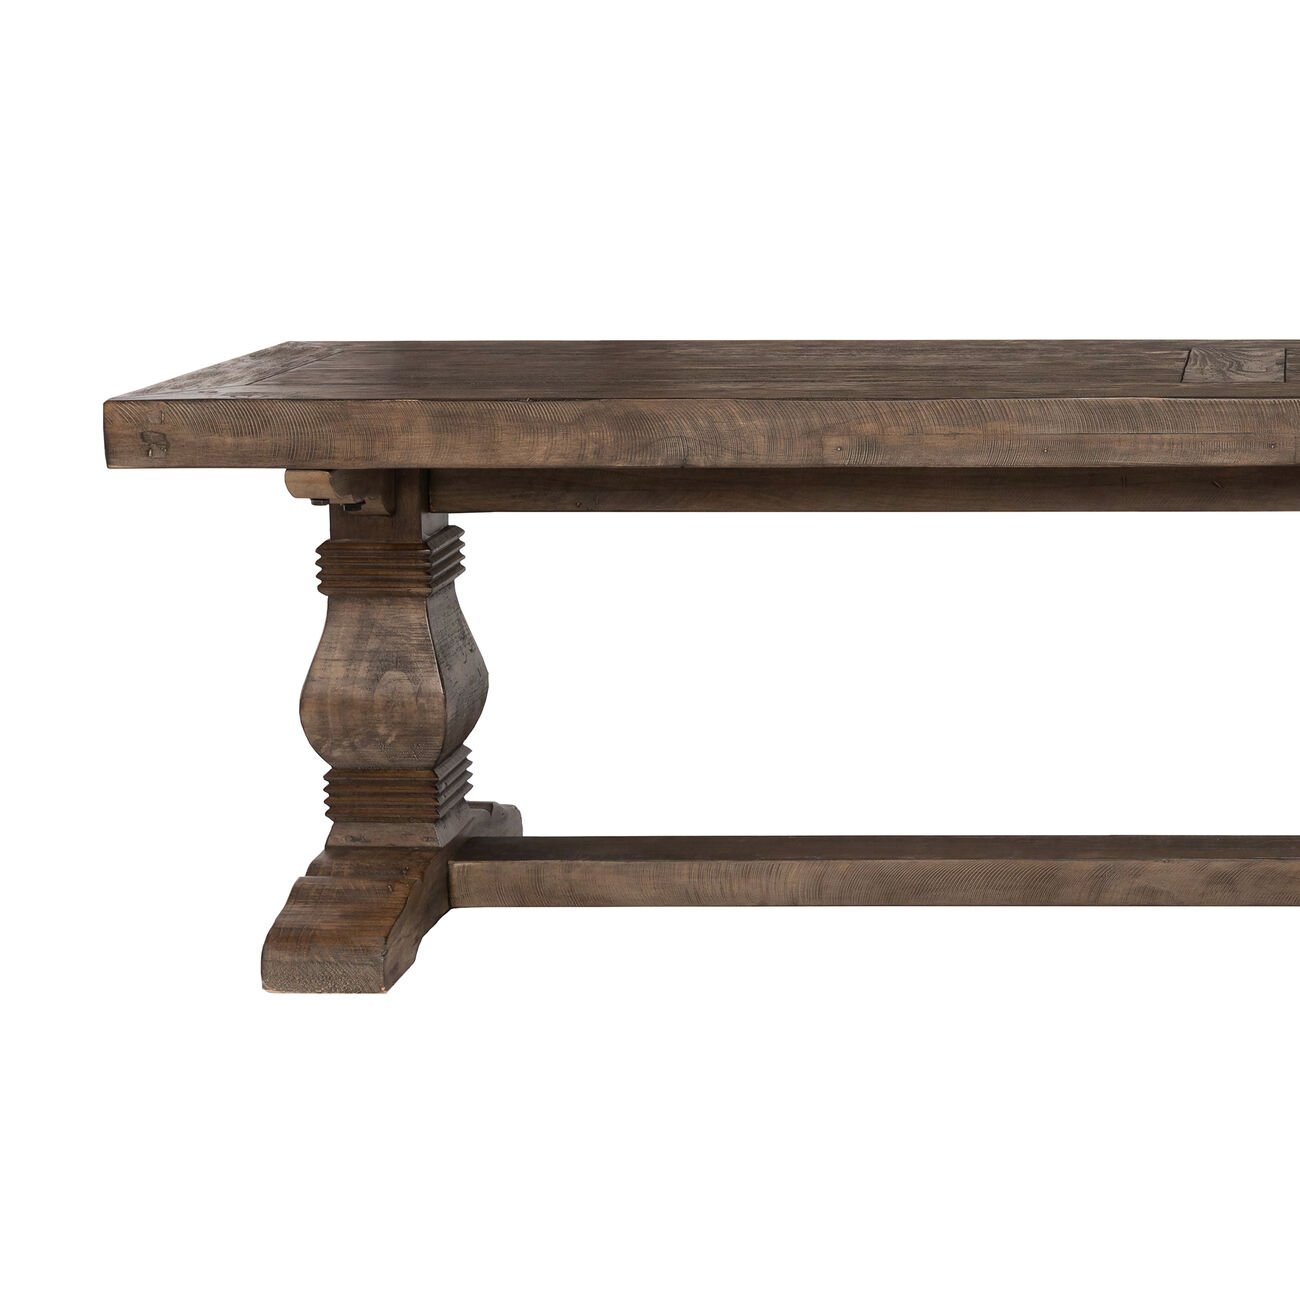 66 Inch Plank Top Wooden Bench with Pedestal Base, Brown